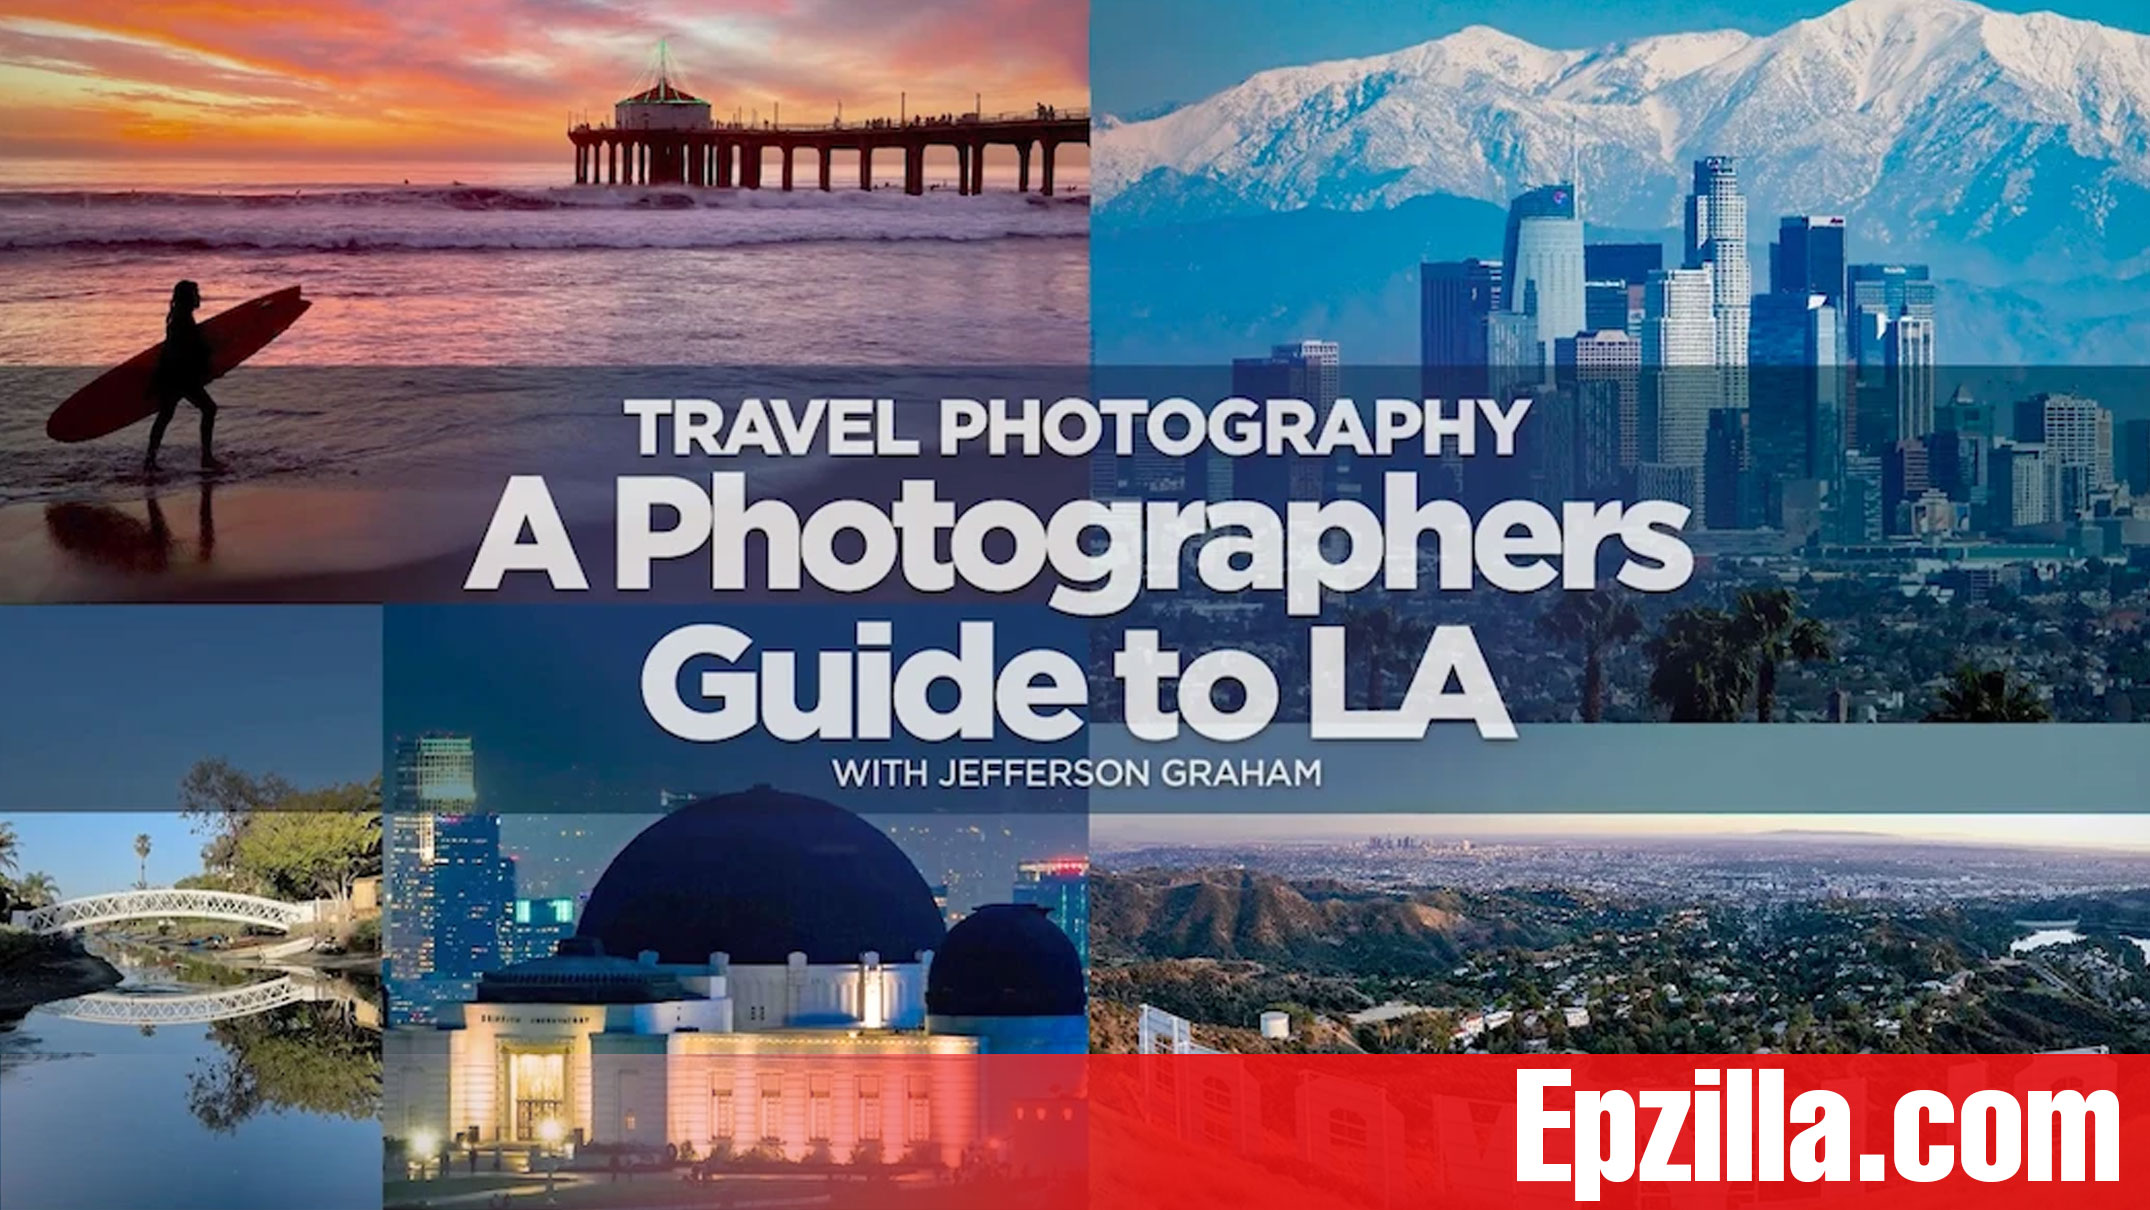 KelbyOne Travel Photography A Photographer’s Guide to LA with Jefferson Graham Free Download